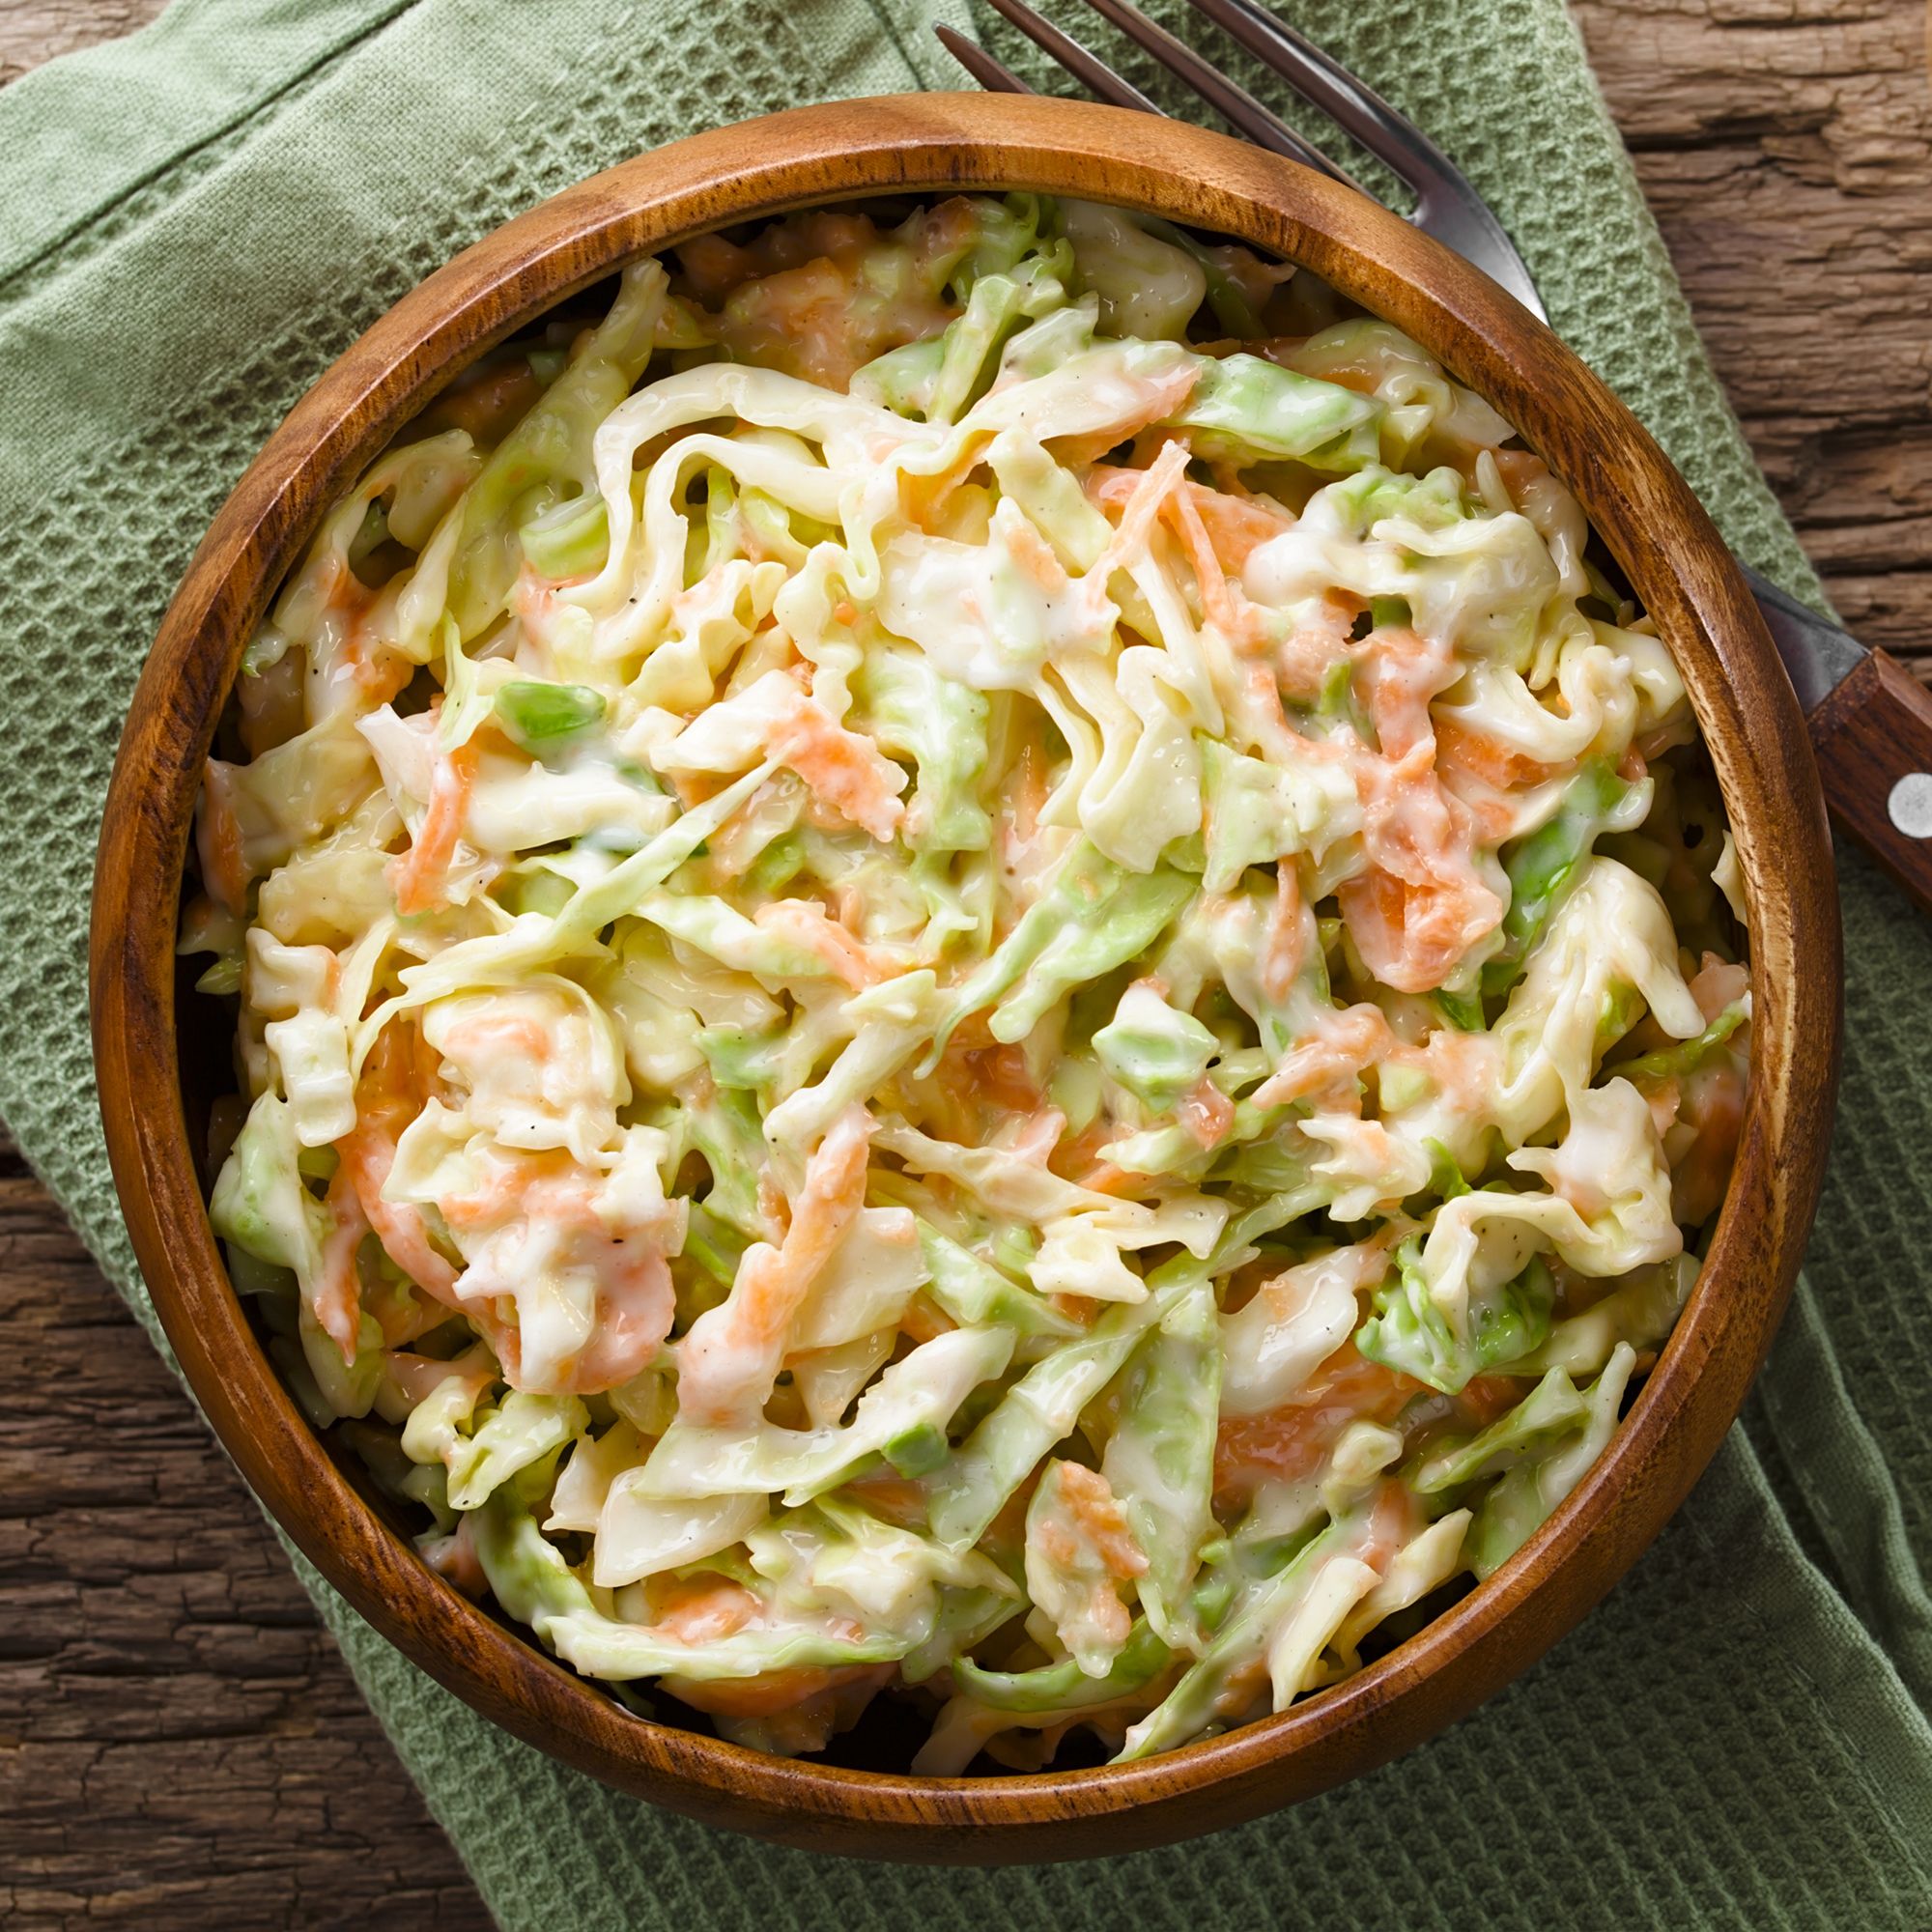 Coleslaw Recipes You Can Try